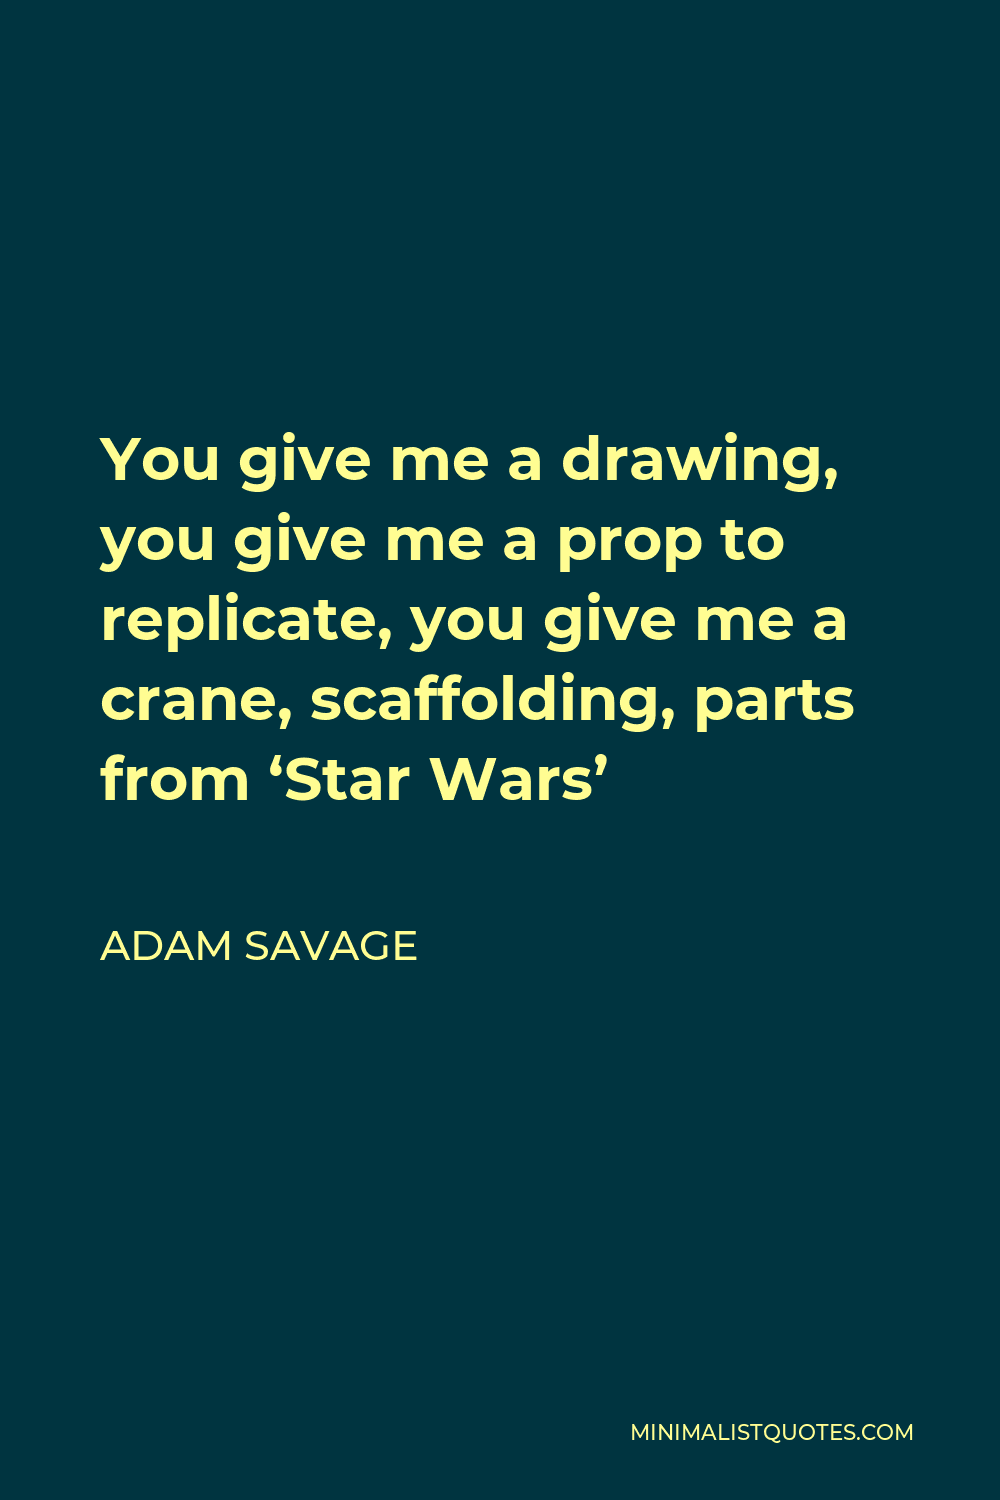 Adam Savage Quote - You give me a drawing, you give me a prop to replicate, you give me a crane, scaffolding, parts from ‘Star Wars’